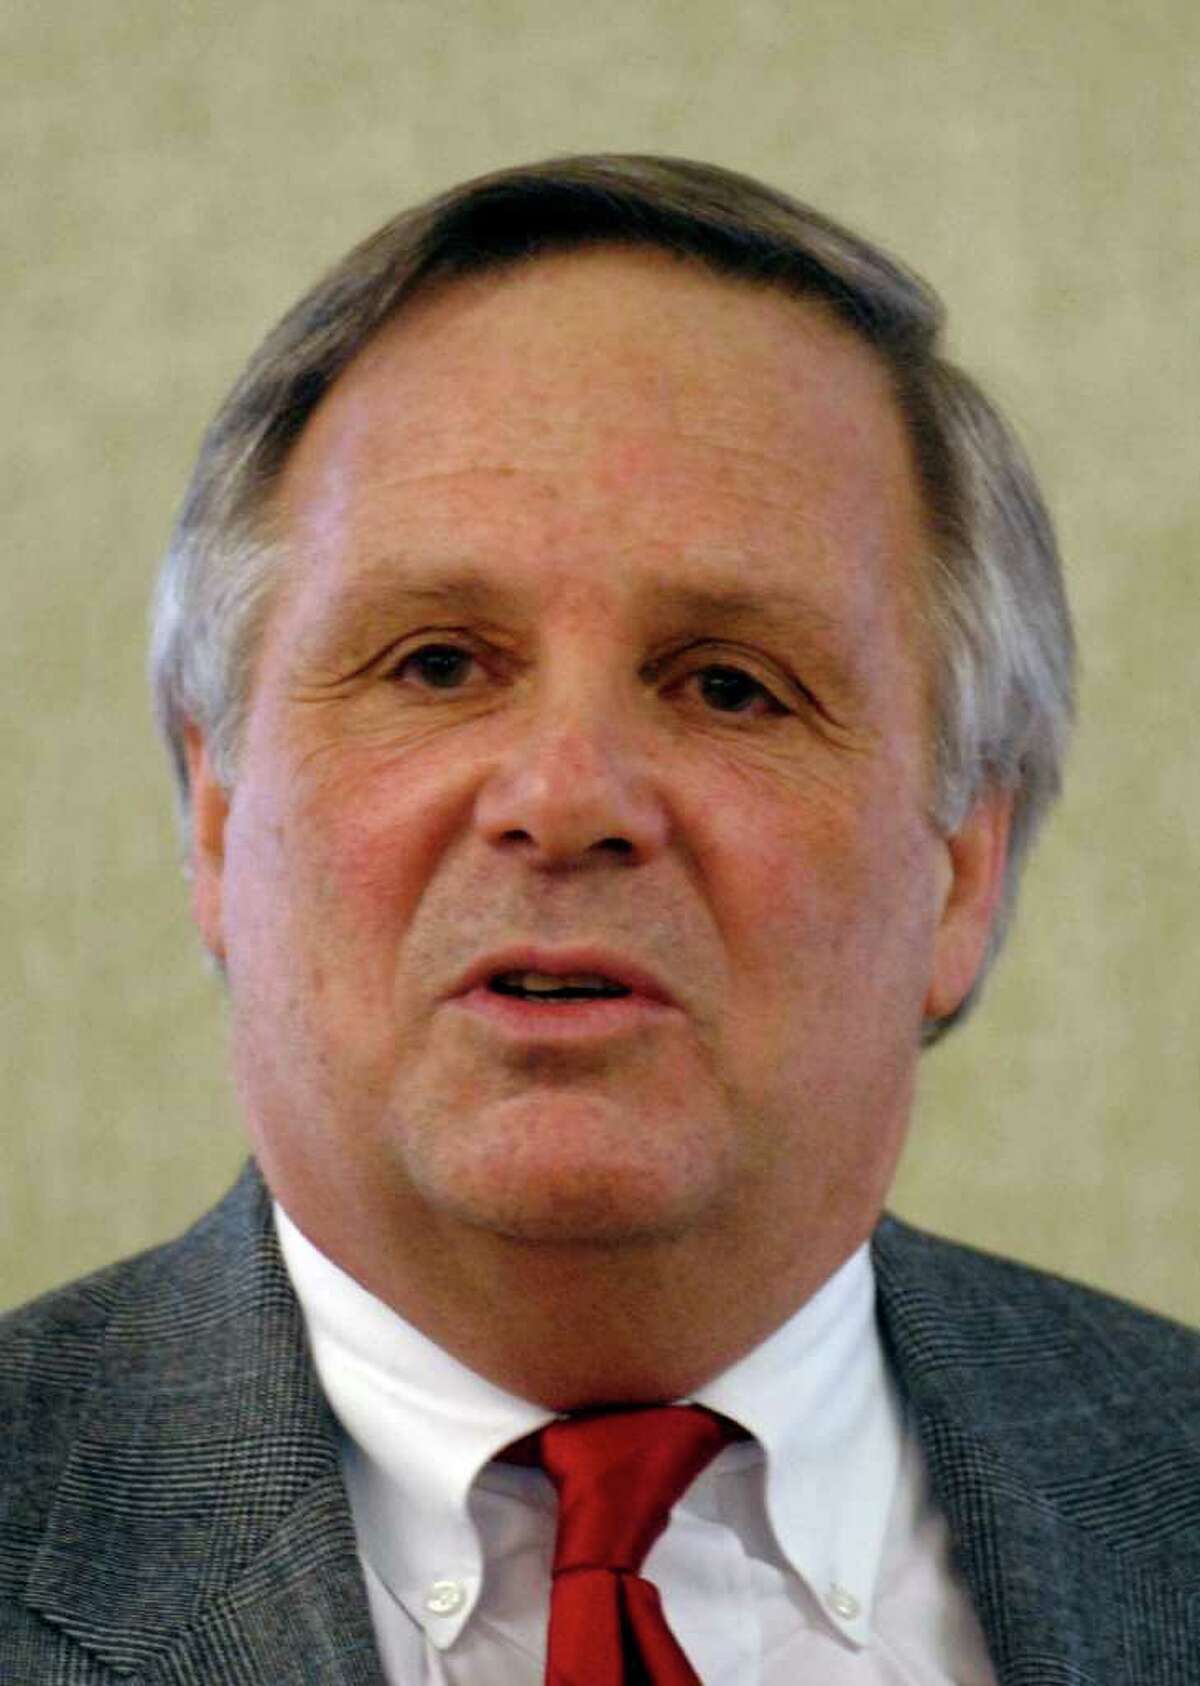 Mark K. McQuillan speaks during a news conference Wednesday, Jan. 17, 2007, in Hartford, Conn., after he was appointed to lead Connecticut's school system.